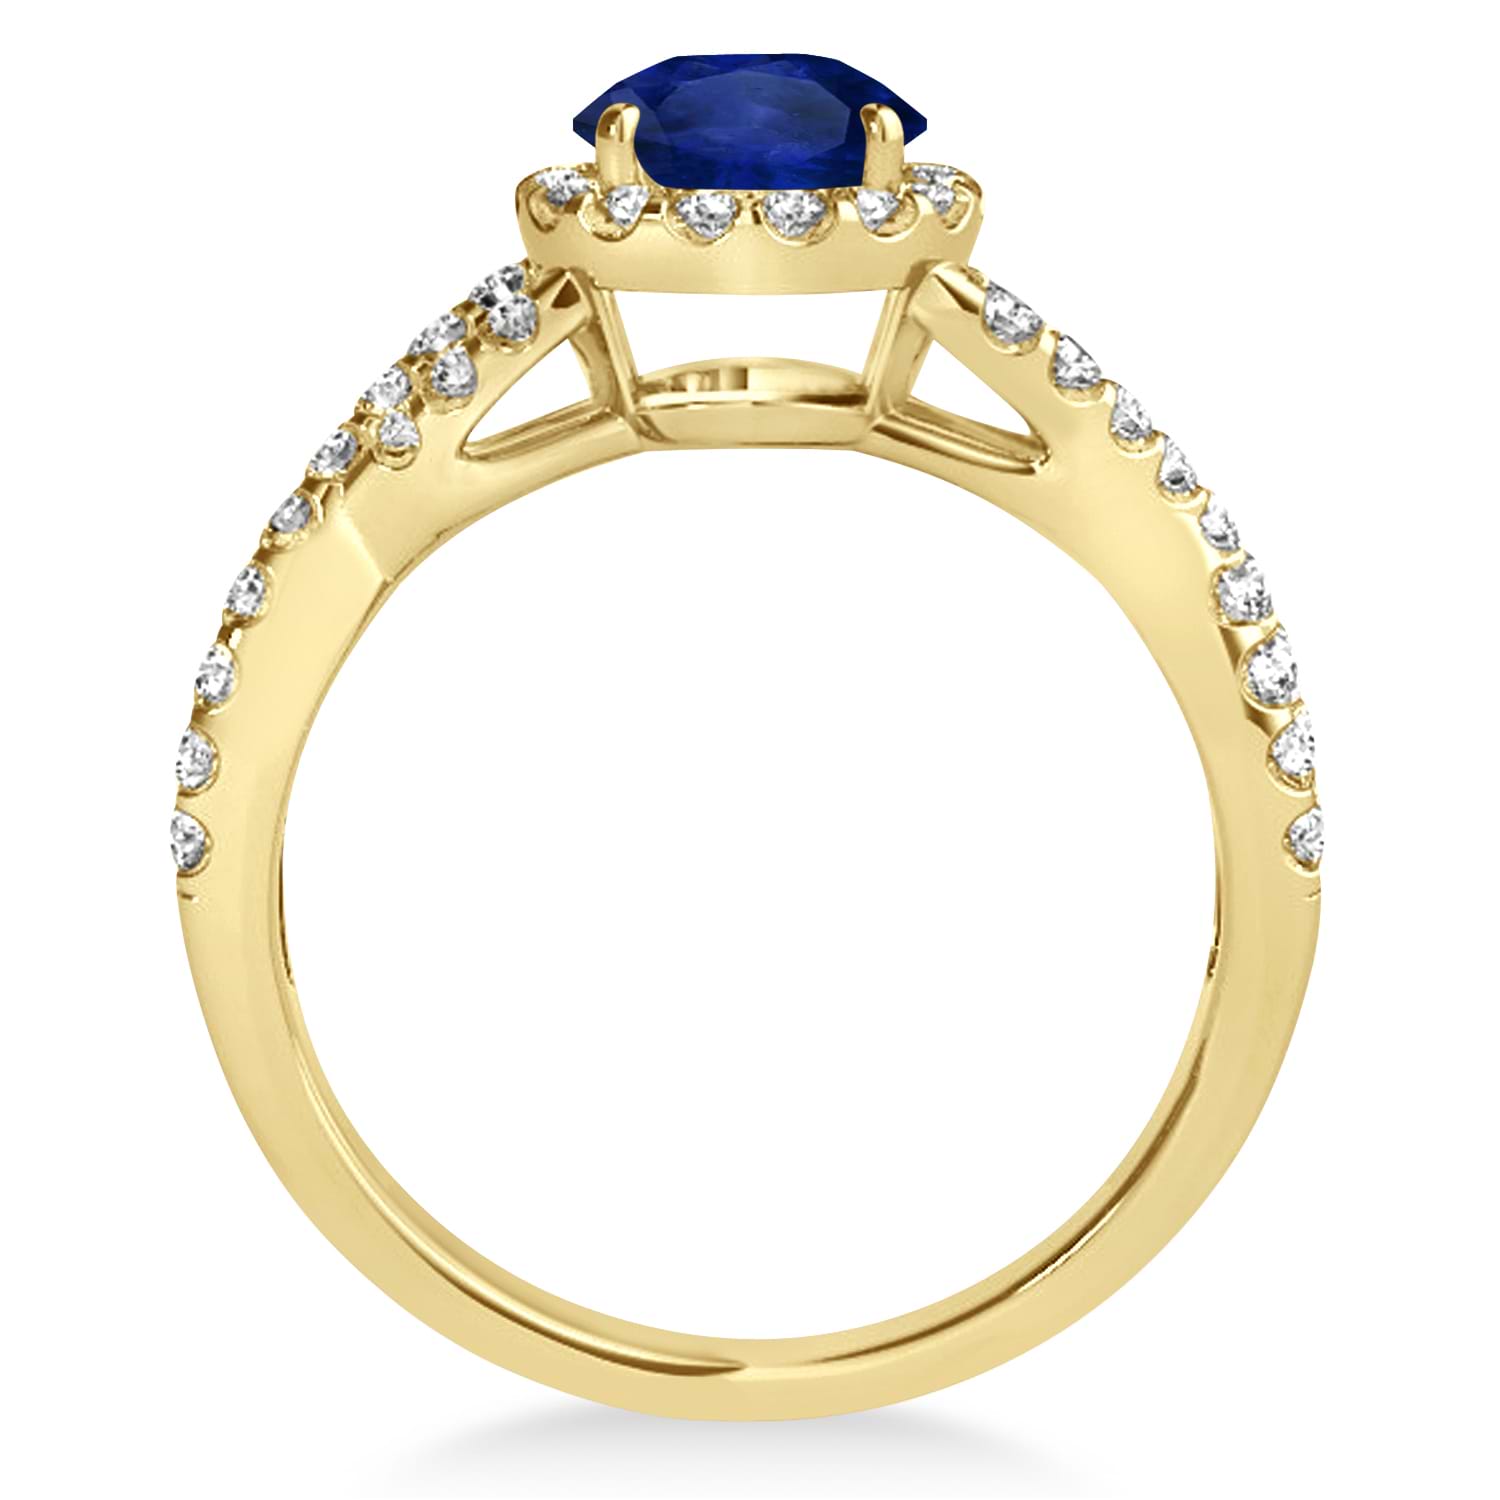 Blue Sapphire & Diamond Twisted Engagement Ring 18k Yellow Gold 1.55ct